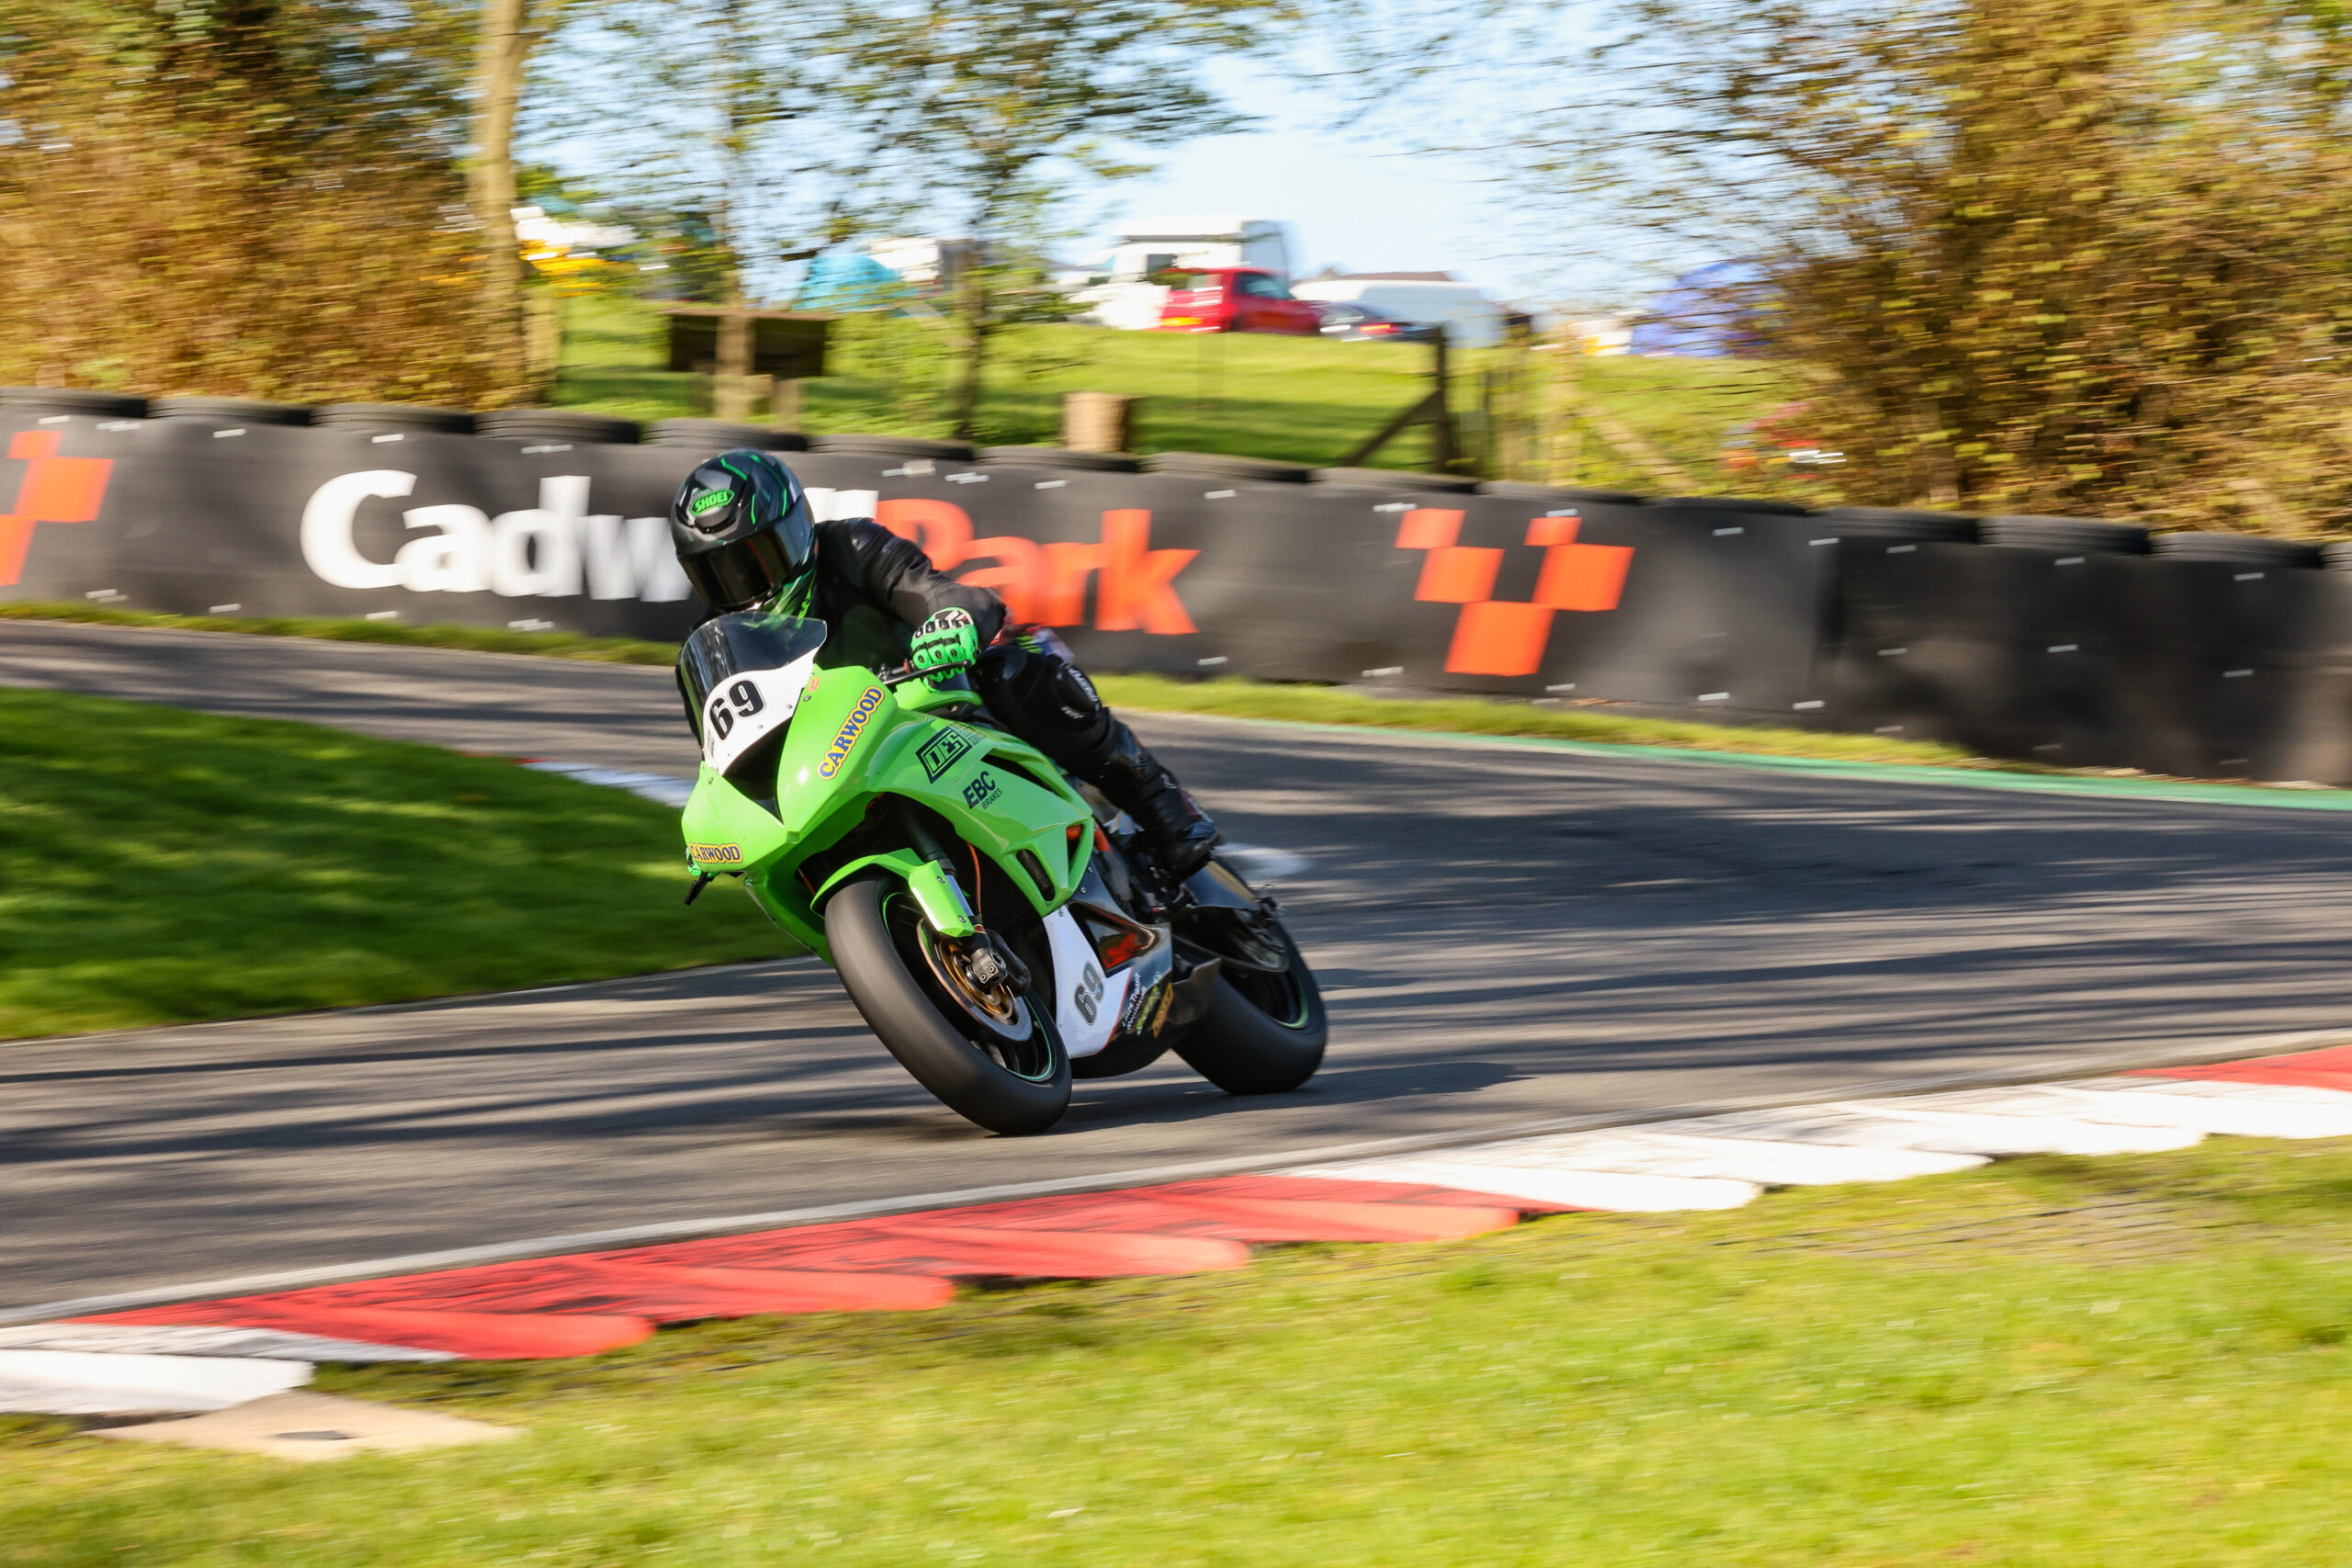 NGRRC Racer Otter Continues Campaign at Cadwell Park